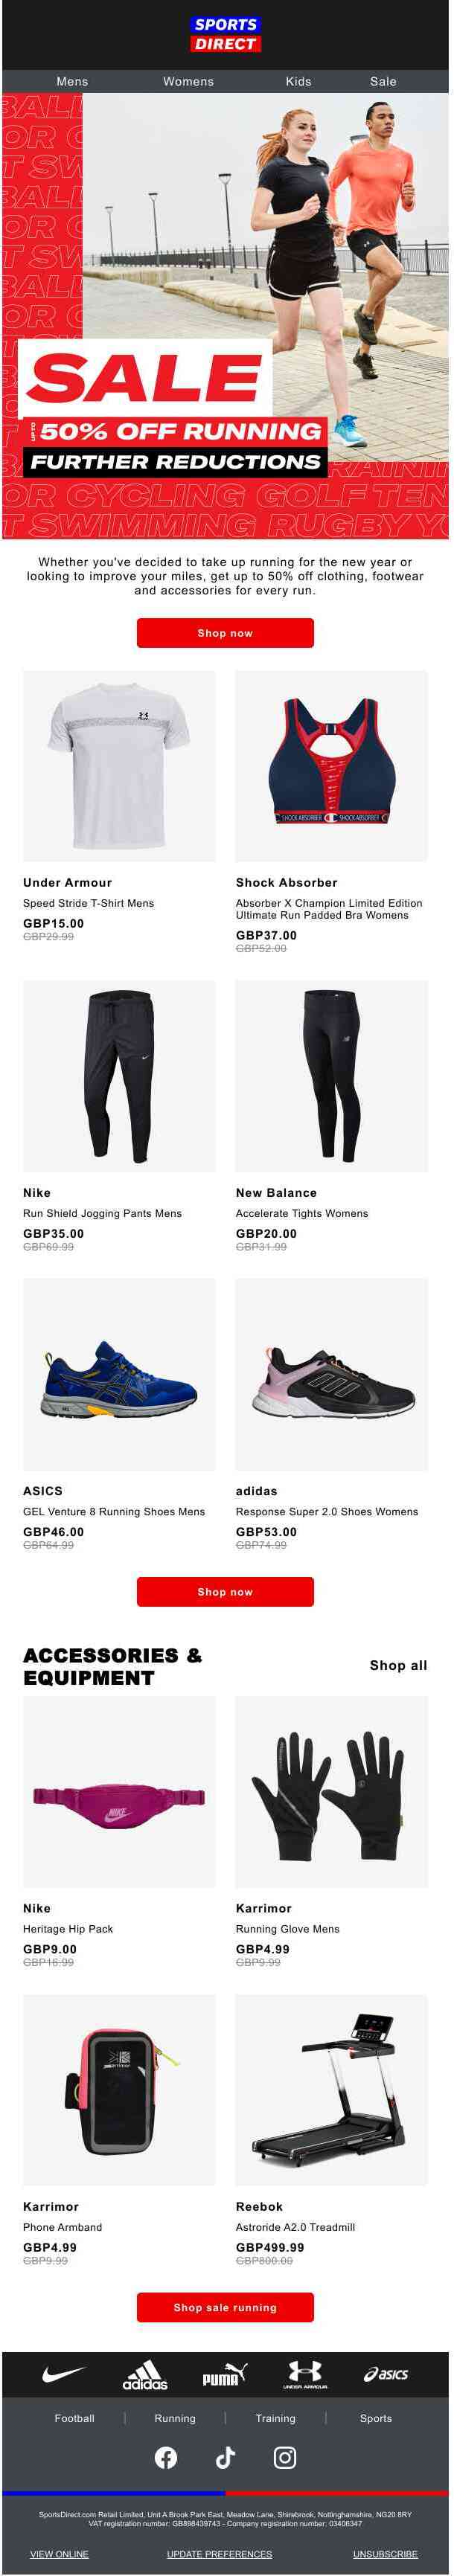 Running Essentials | Further Reductions 🏃